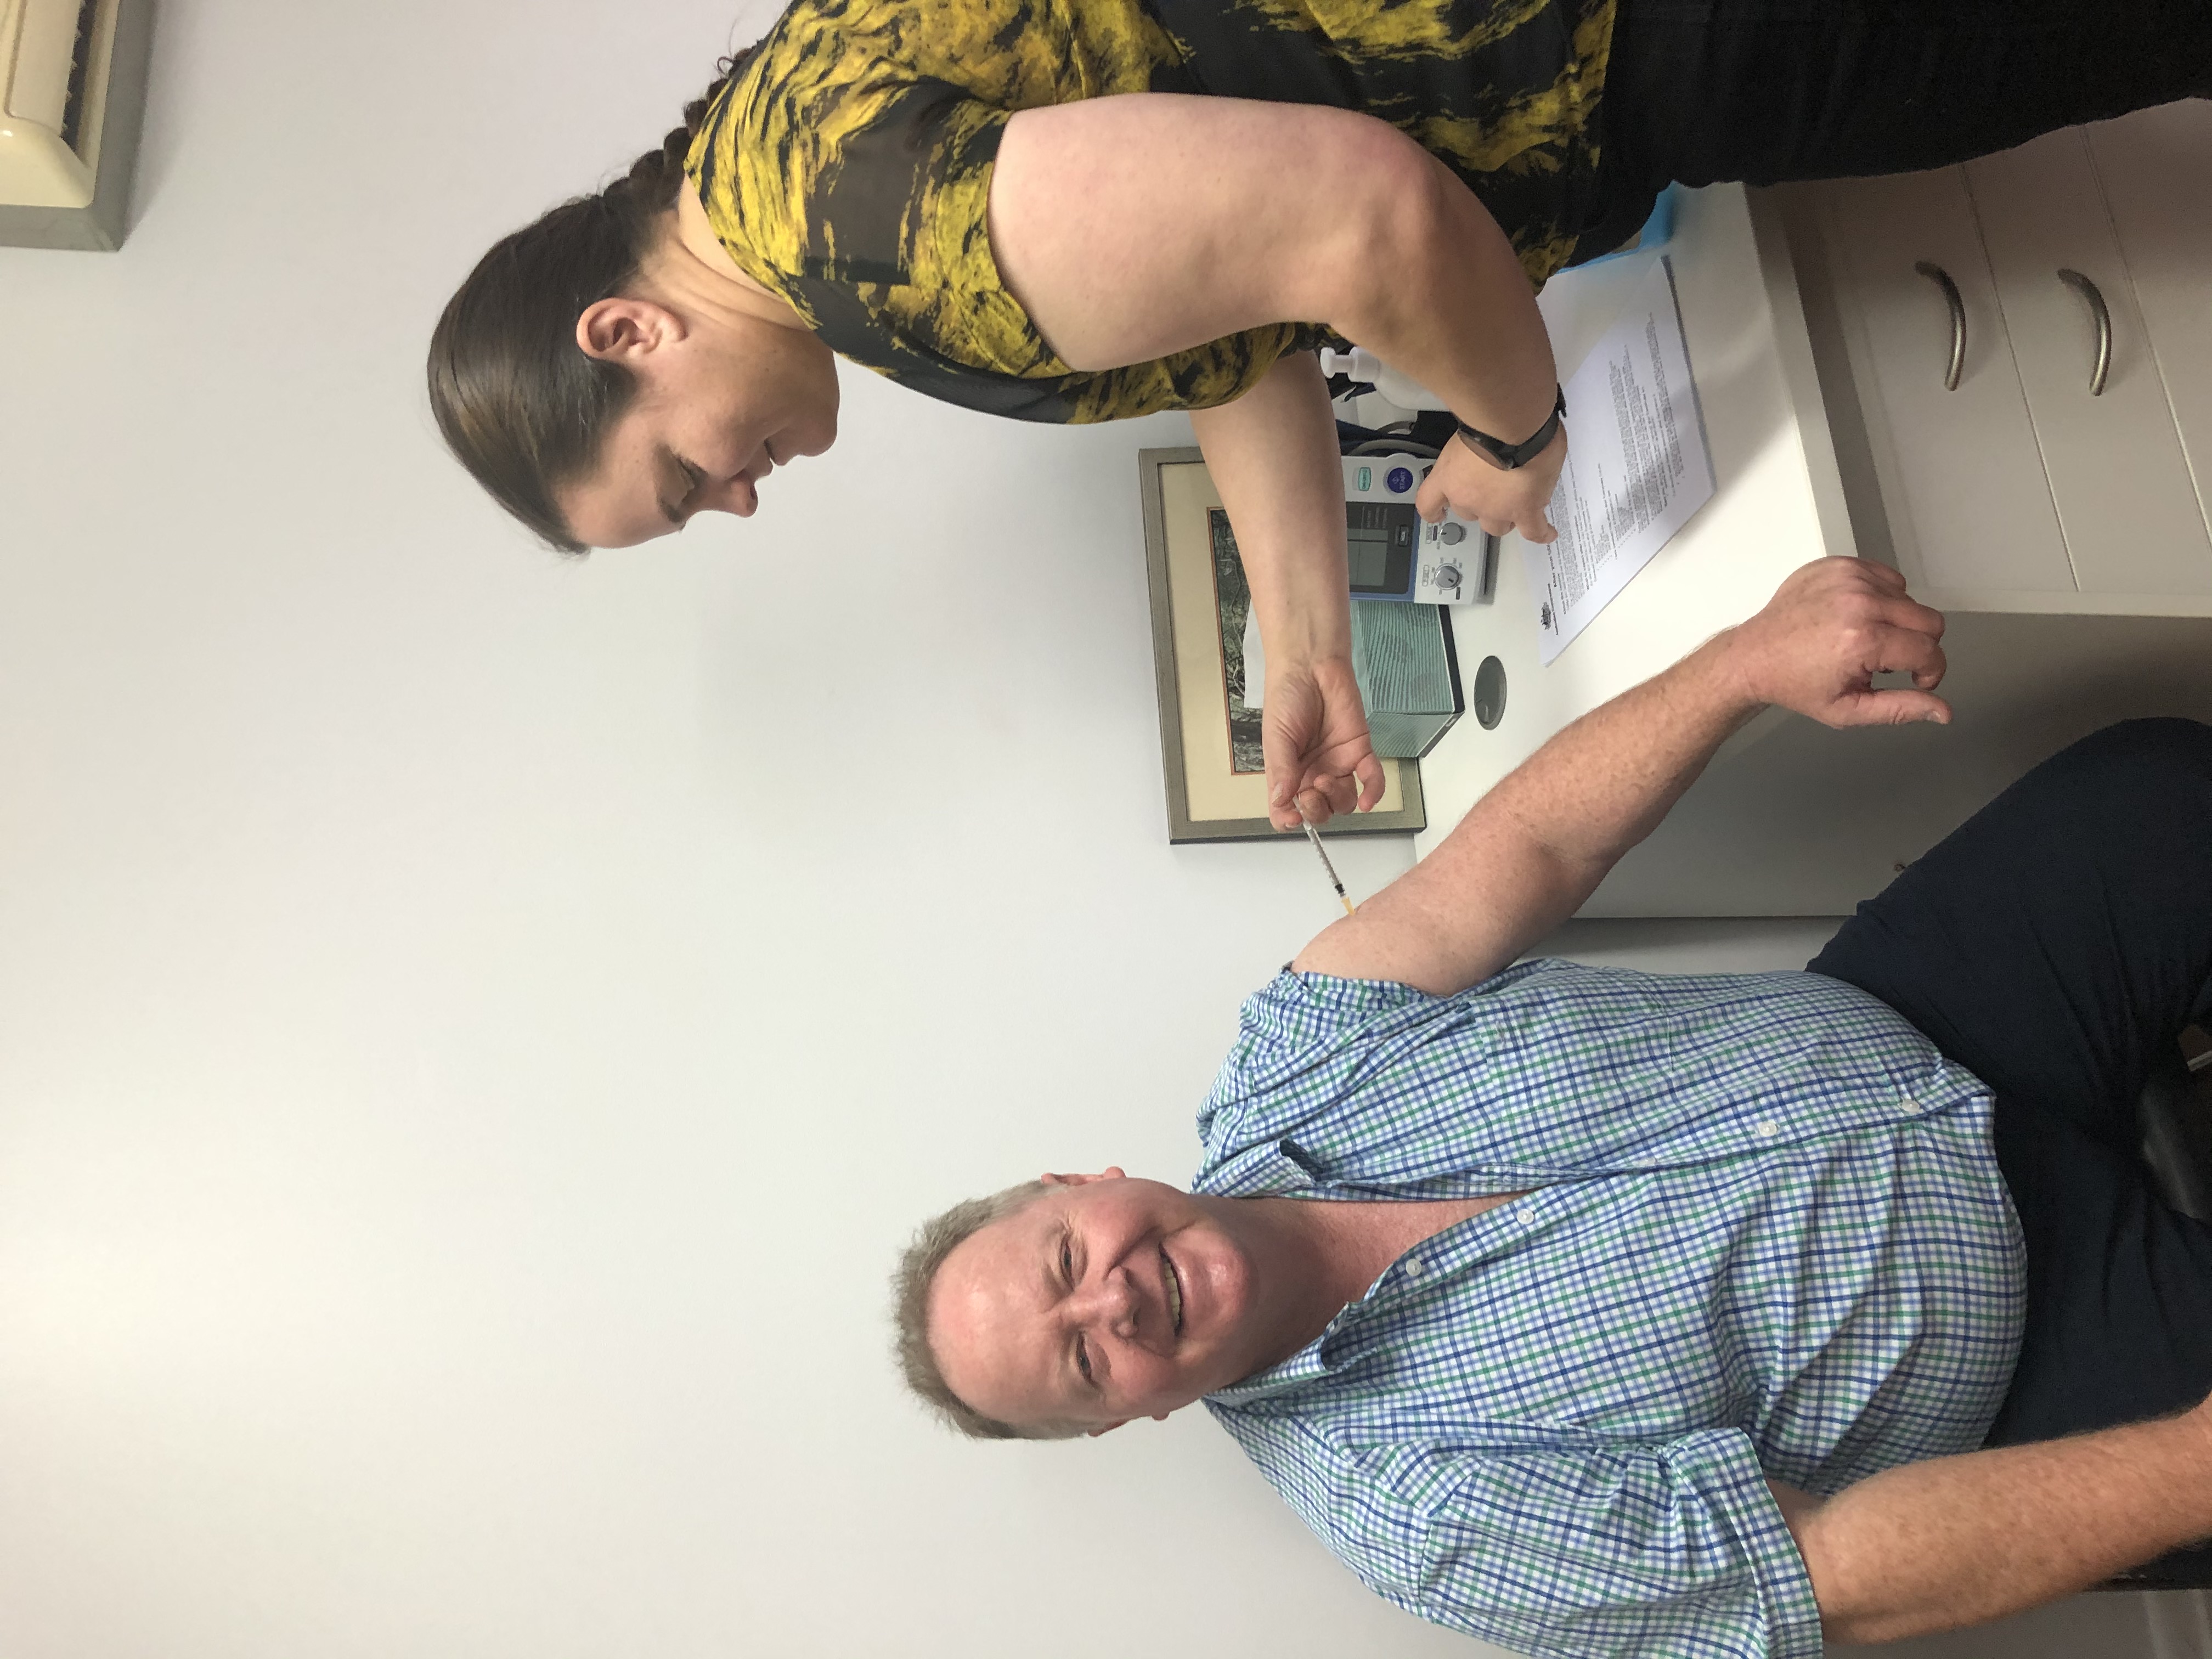 Image: Mayor Brett Otto receiving his first vaccination for COVID-19